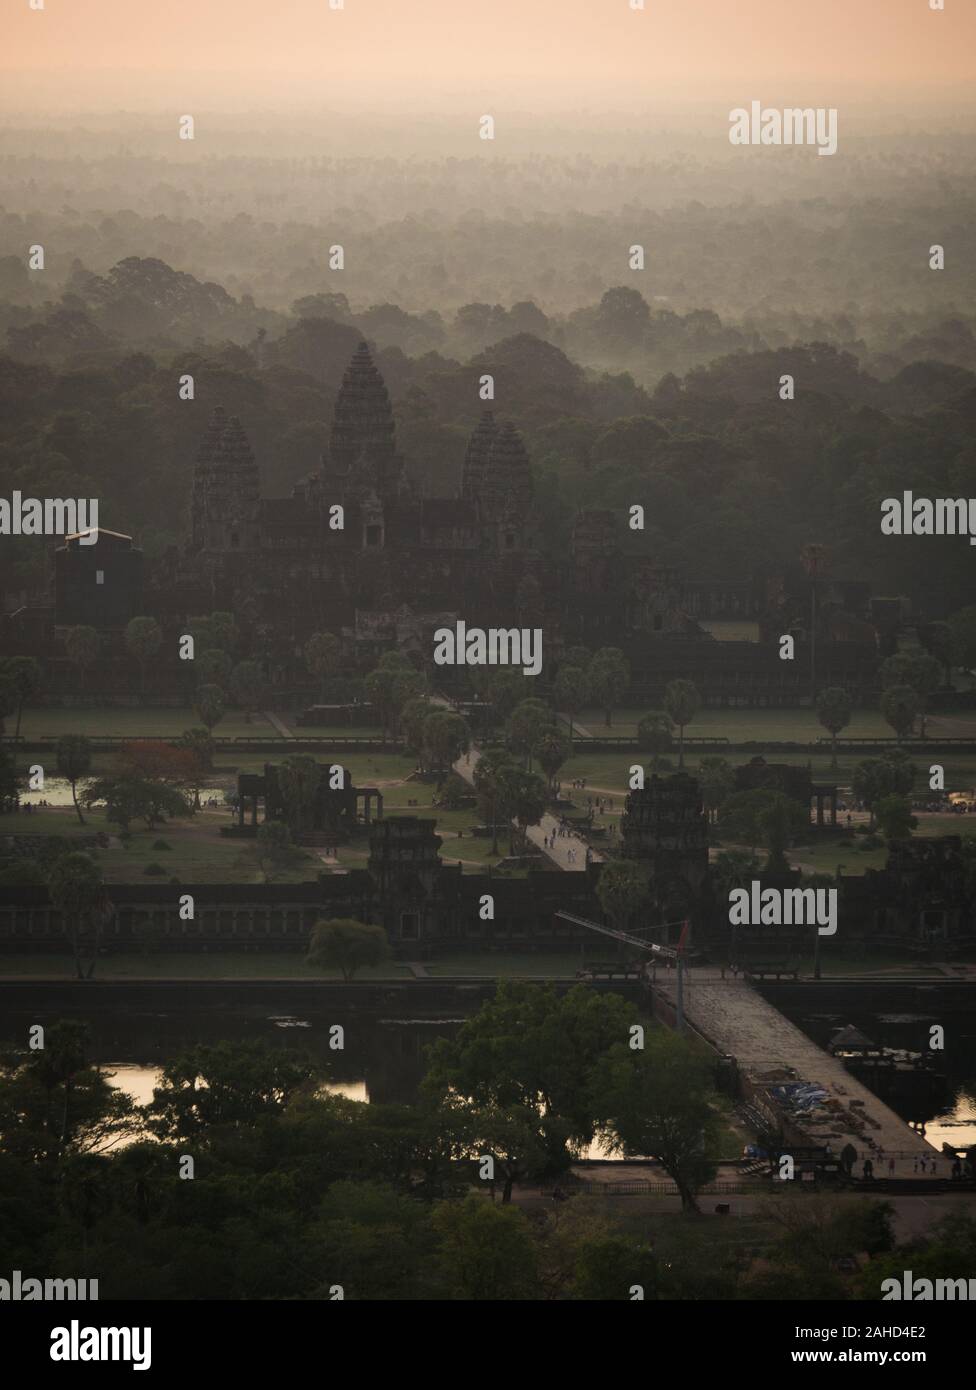 Aerial view on Angkor Wat temple complex and ancient city of Angkor at sunrise on a misty morning, Siem Reap, Cambodia Stock Photo